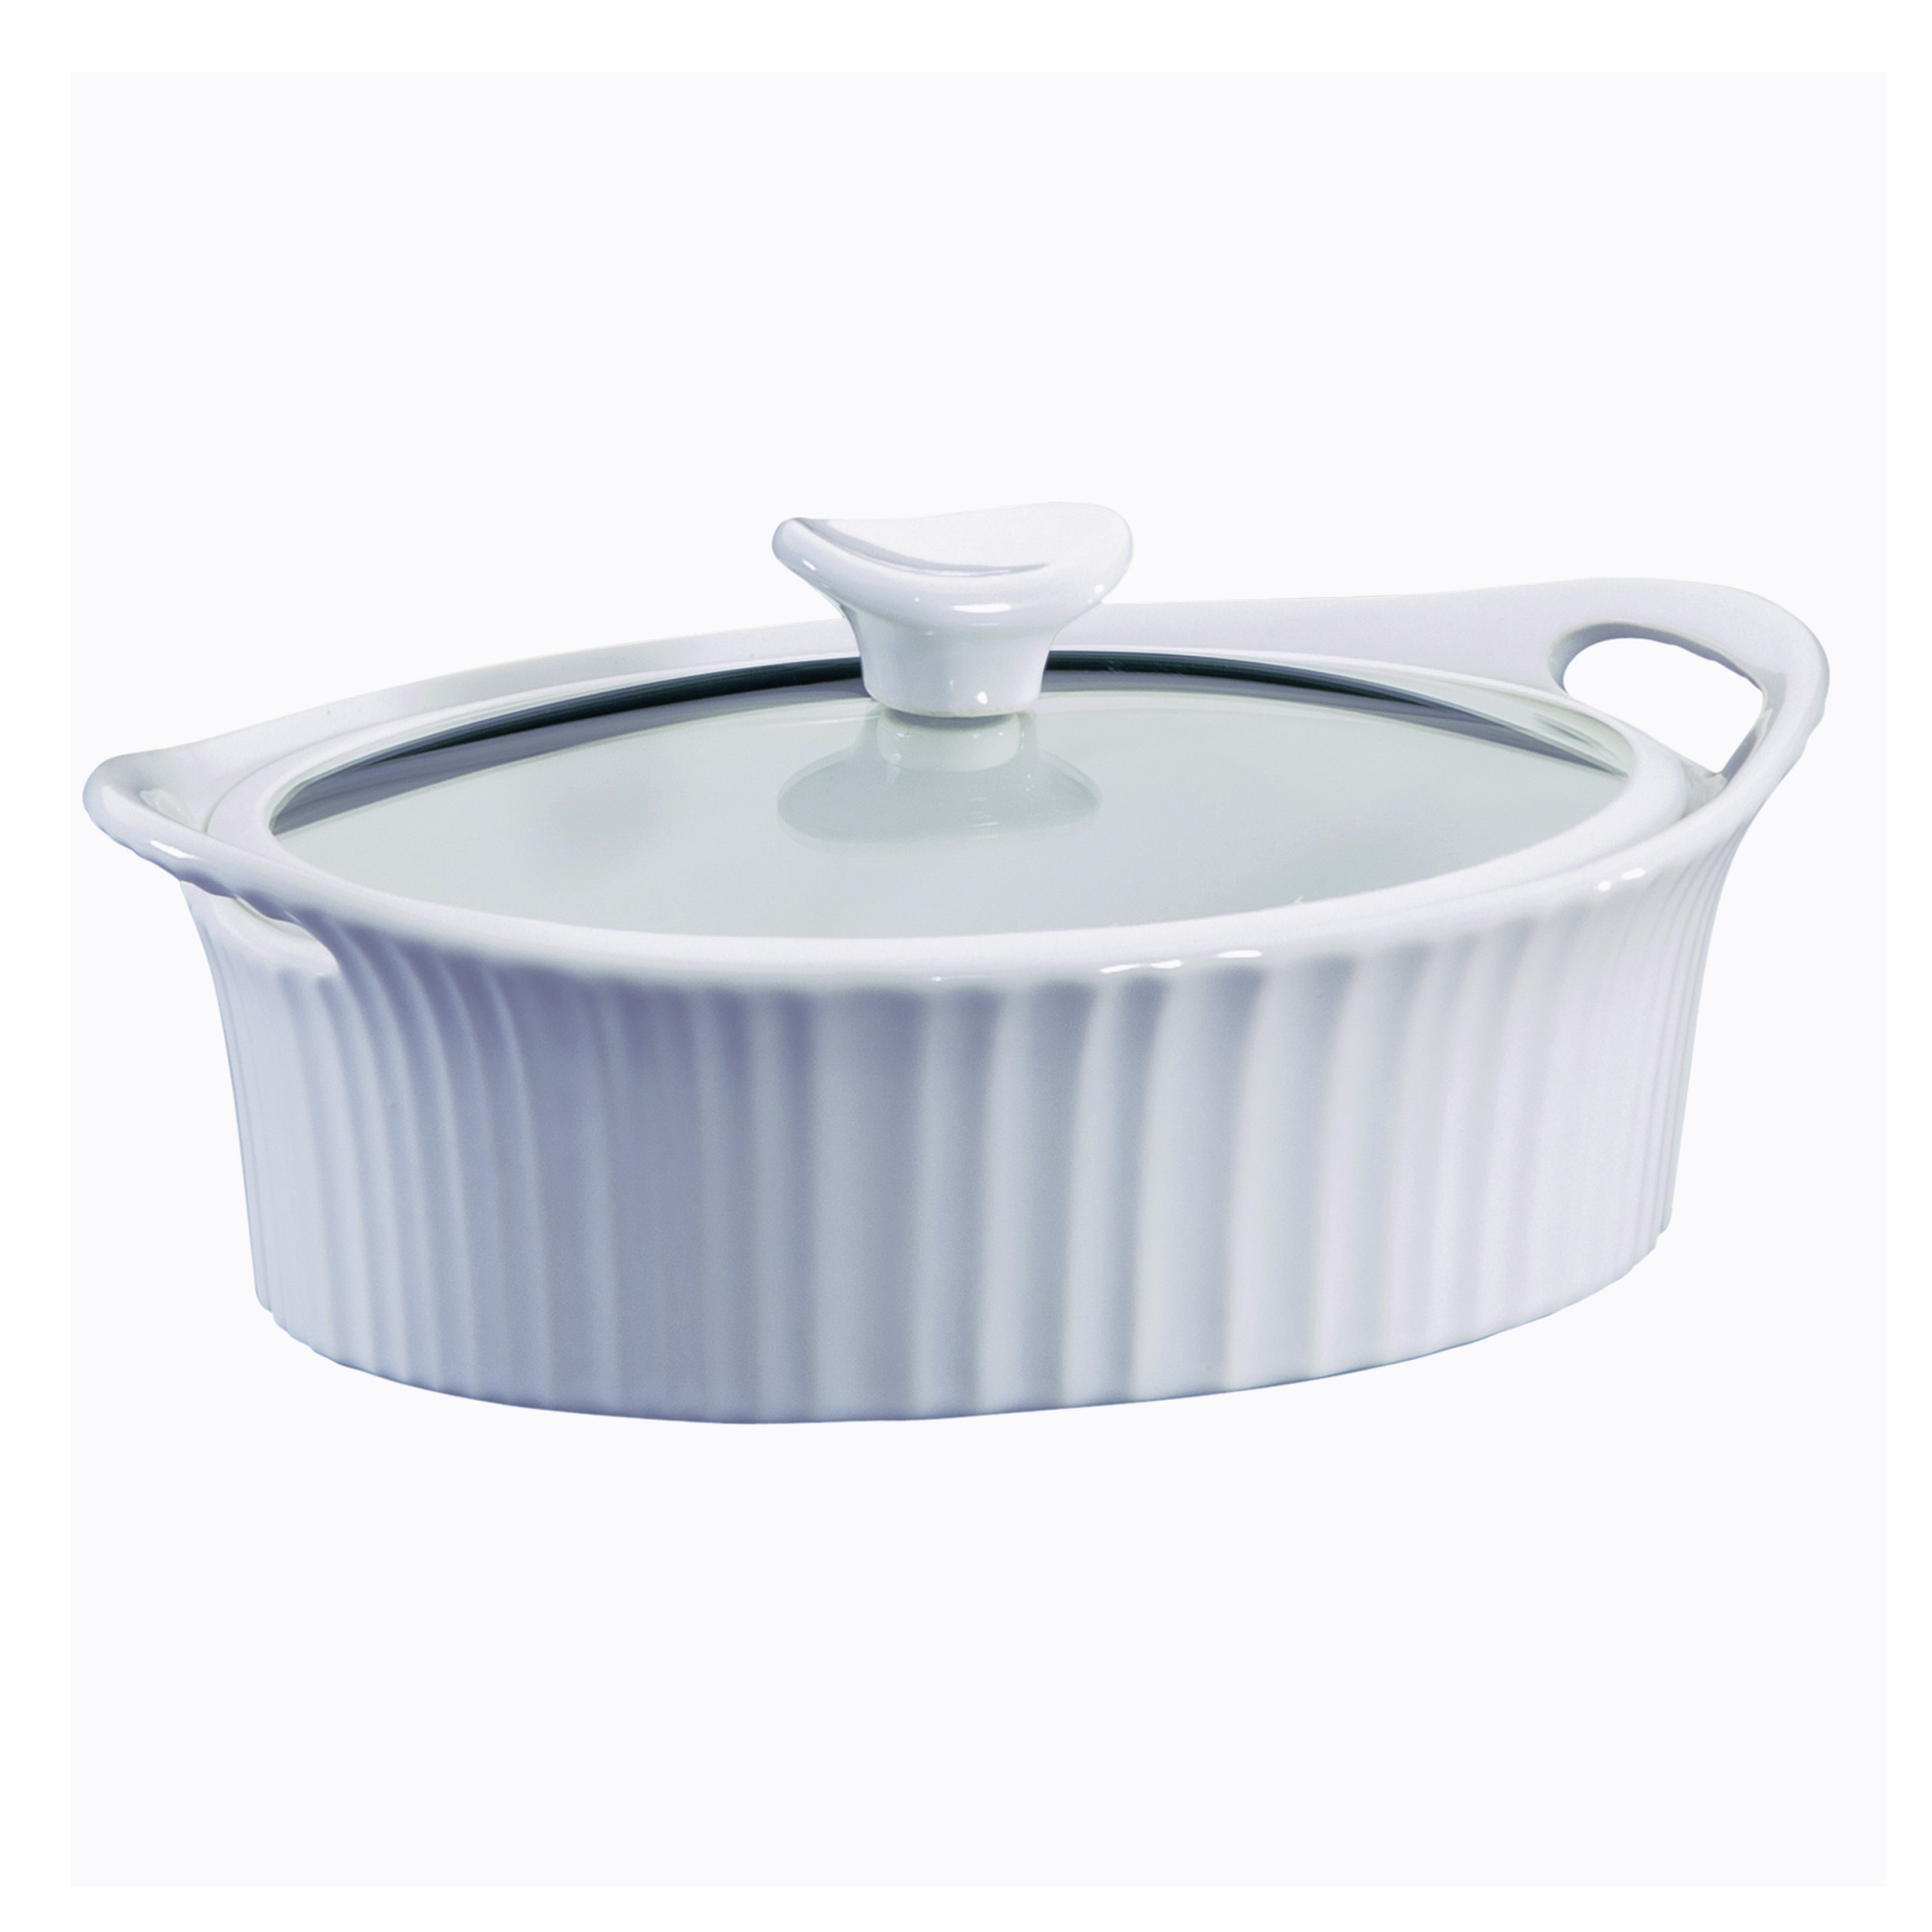 Corningware French White III 1.5-quart Round Casserole with Glass Cover